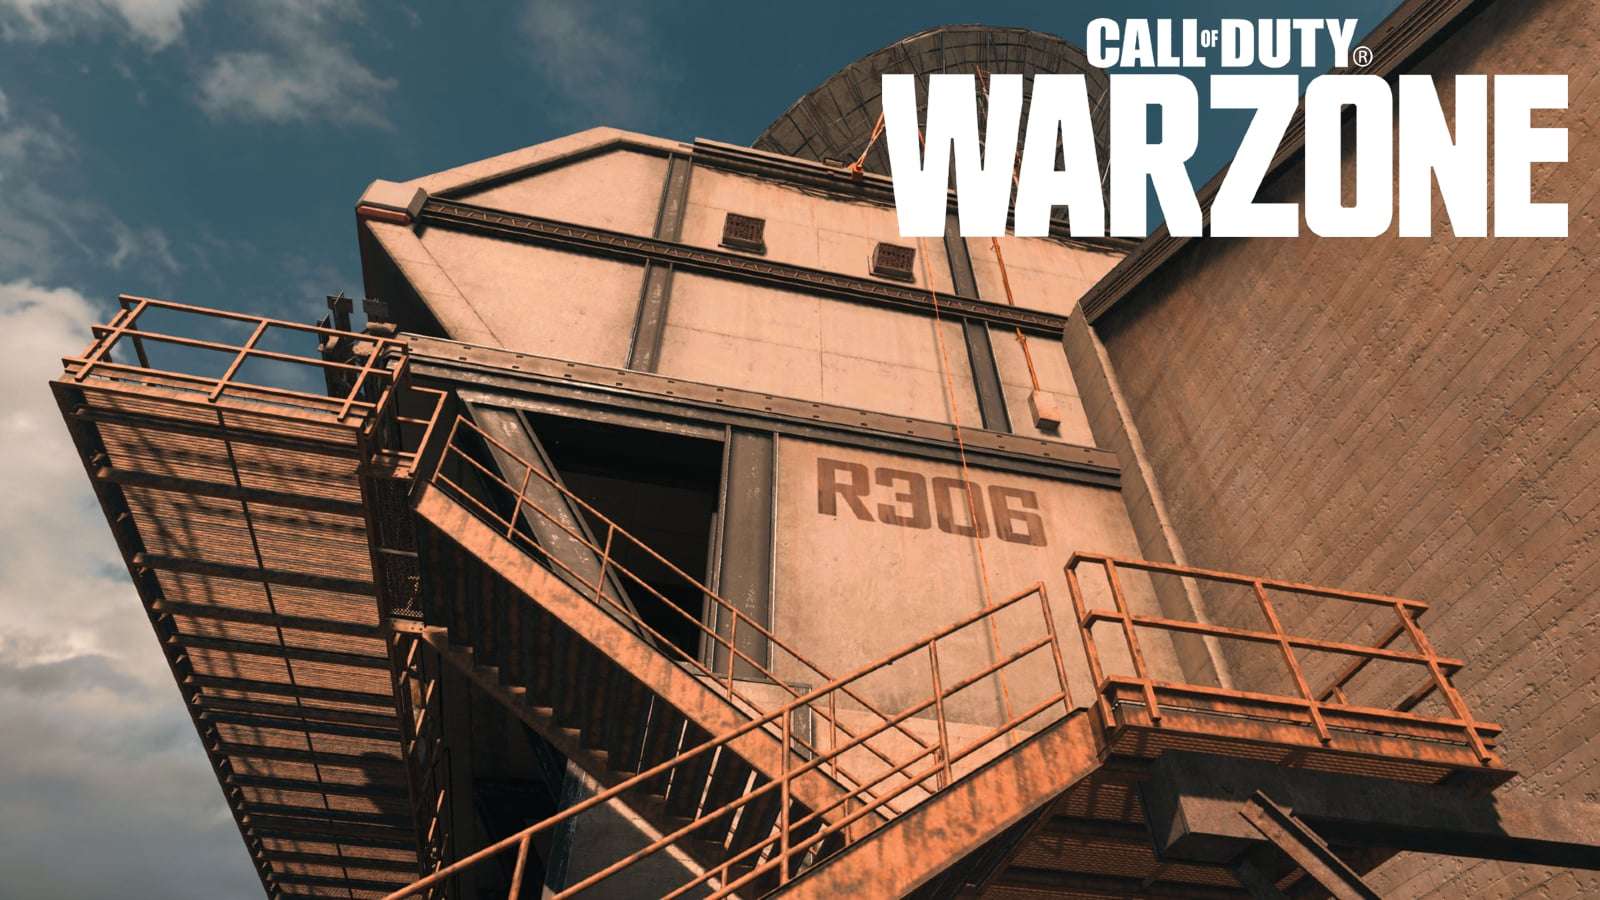 Warzone players frustrated by unfair deaths due to bugged "one-way" railings